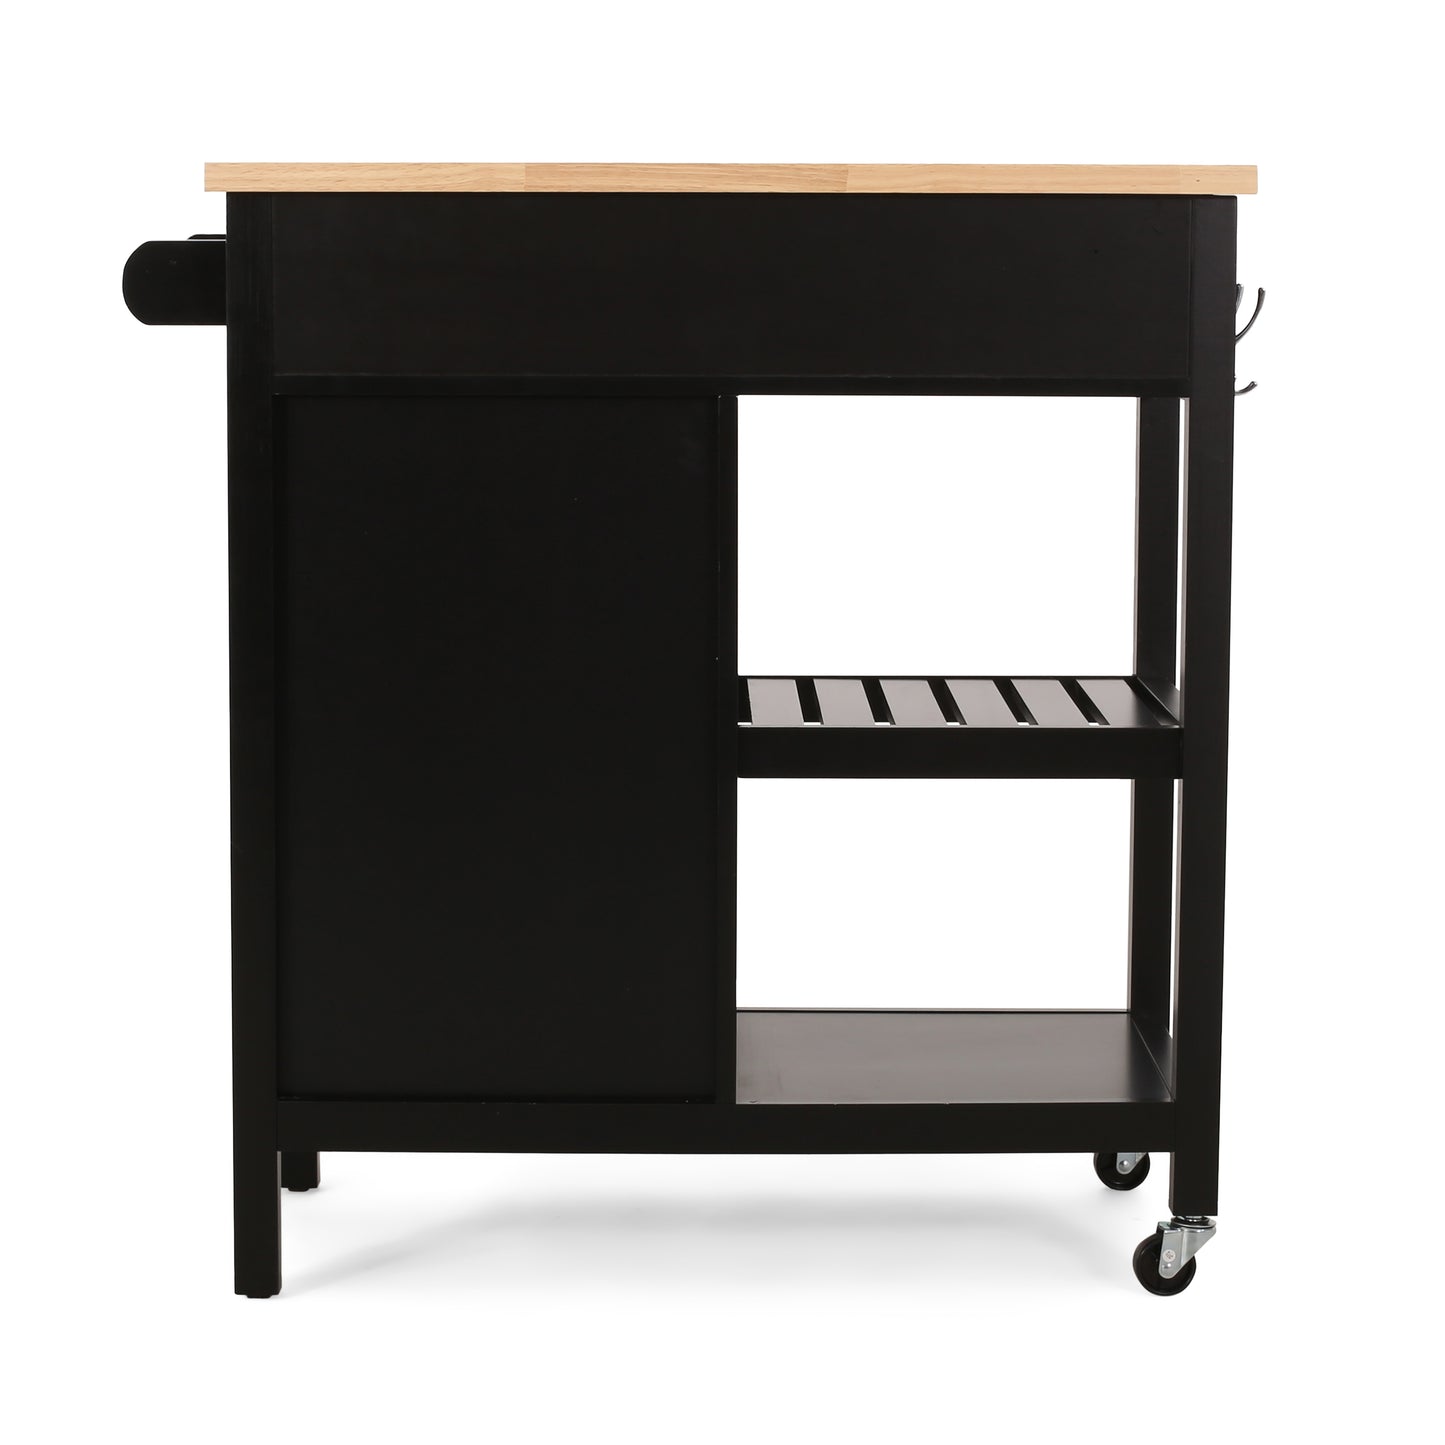 Aidah Contemporary Kitchen Cart with Wheels